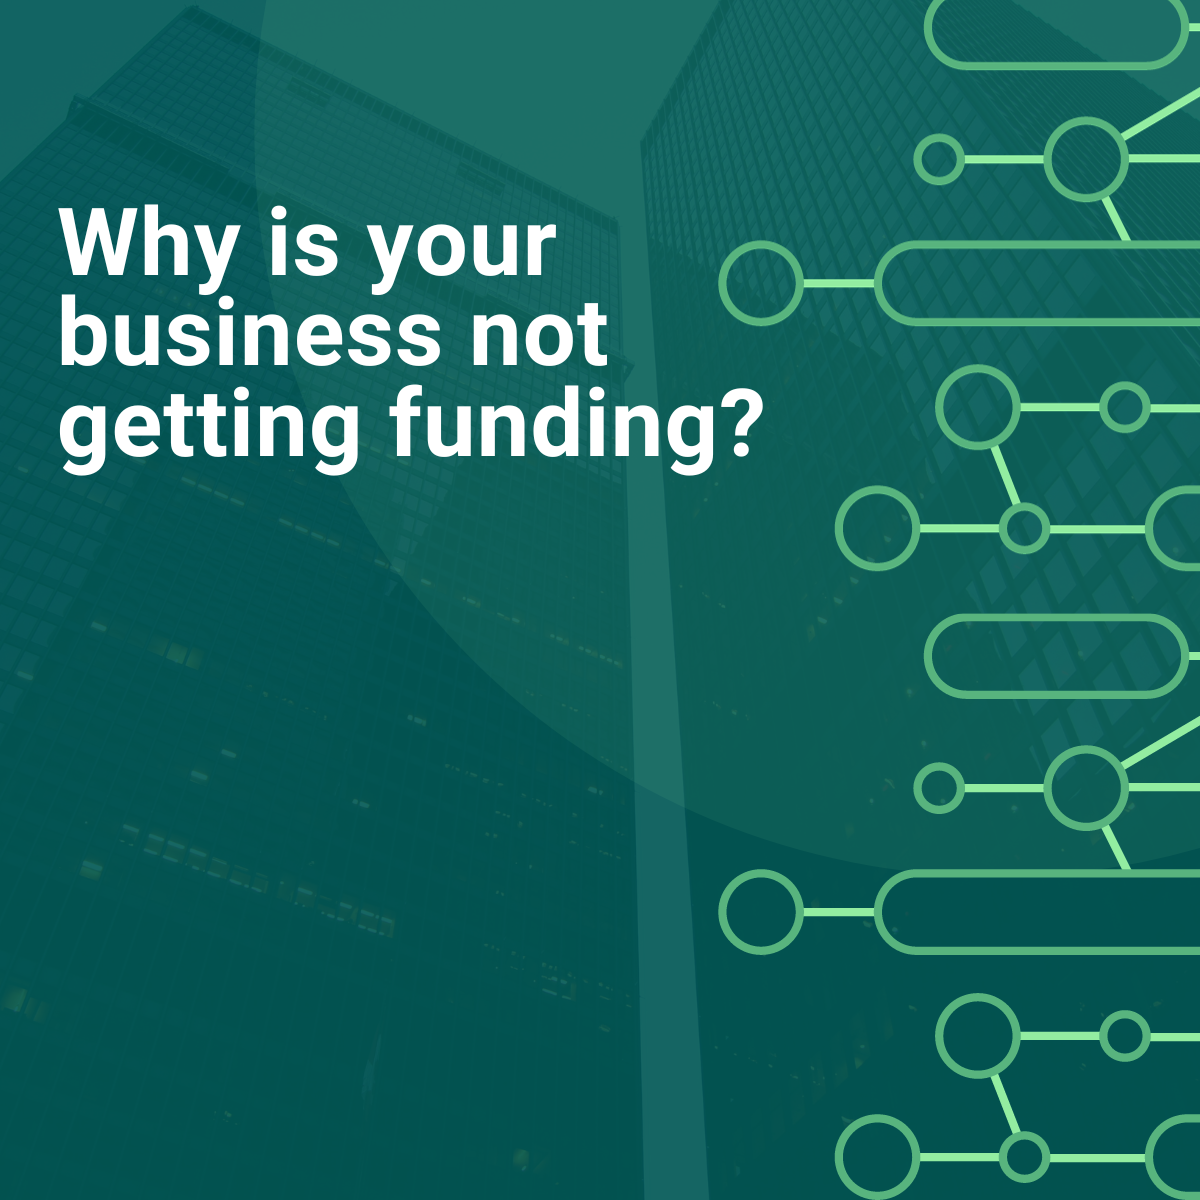 Why is your business not getting funding 5?